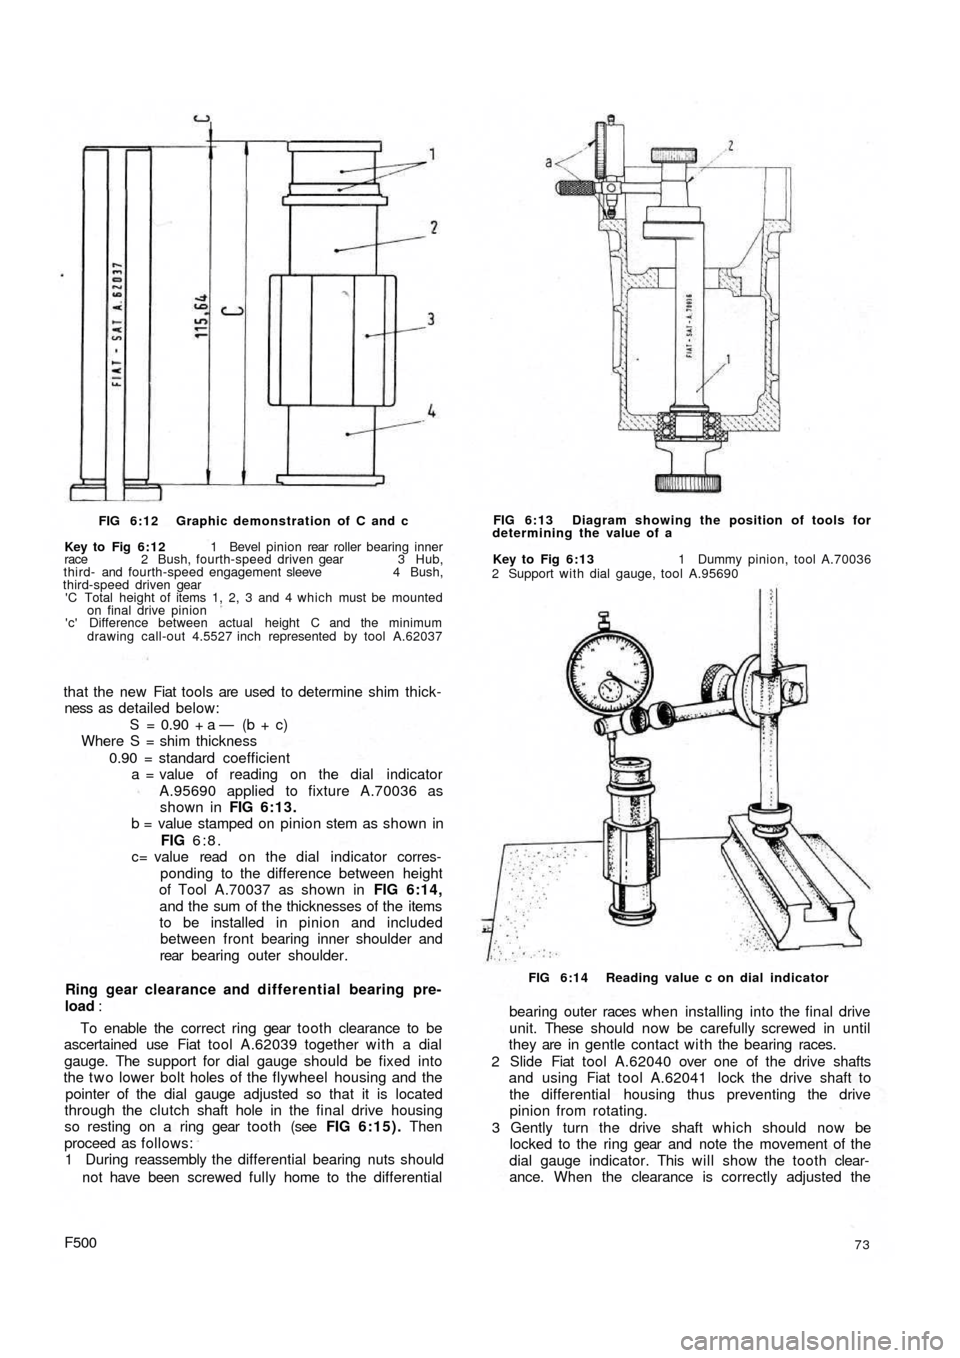 FIAT 500 1972 1.G Workshop Manual FIG 6:12 Graphic demonstration  of C and c
Key to Fig 6:12 1 Bevel pinion rear roller bearing inner
race 2 Bush, fourth-speed driven gear 3 Hub,
third- and fourth-speed engagement sleeve 4 Bush,
third